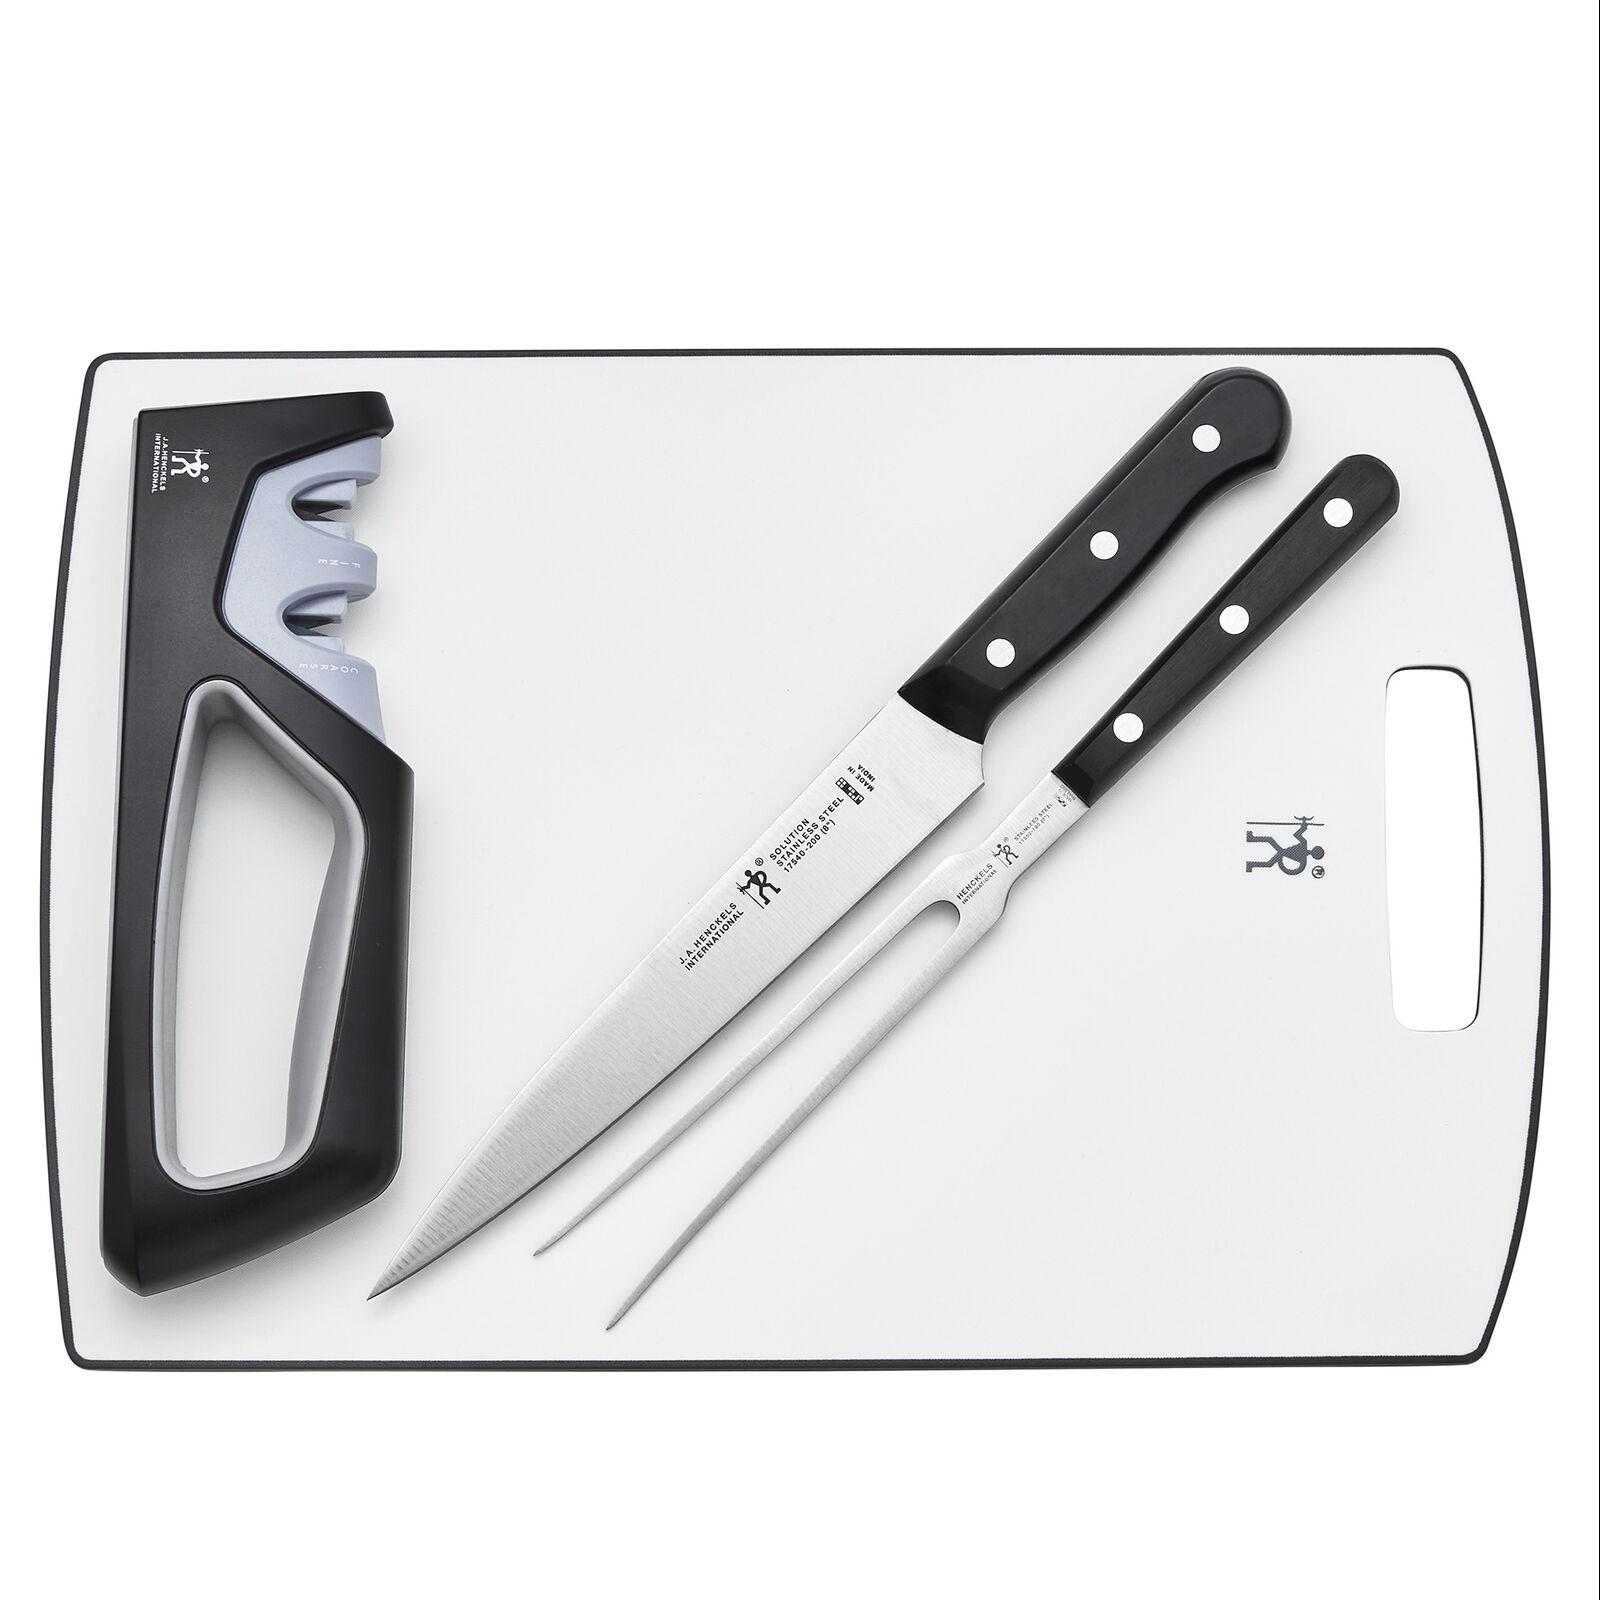 Henckels Solution 4-Piece Carving Set for $23.96 Shipped